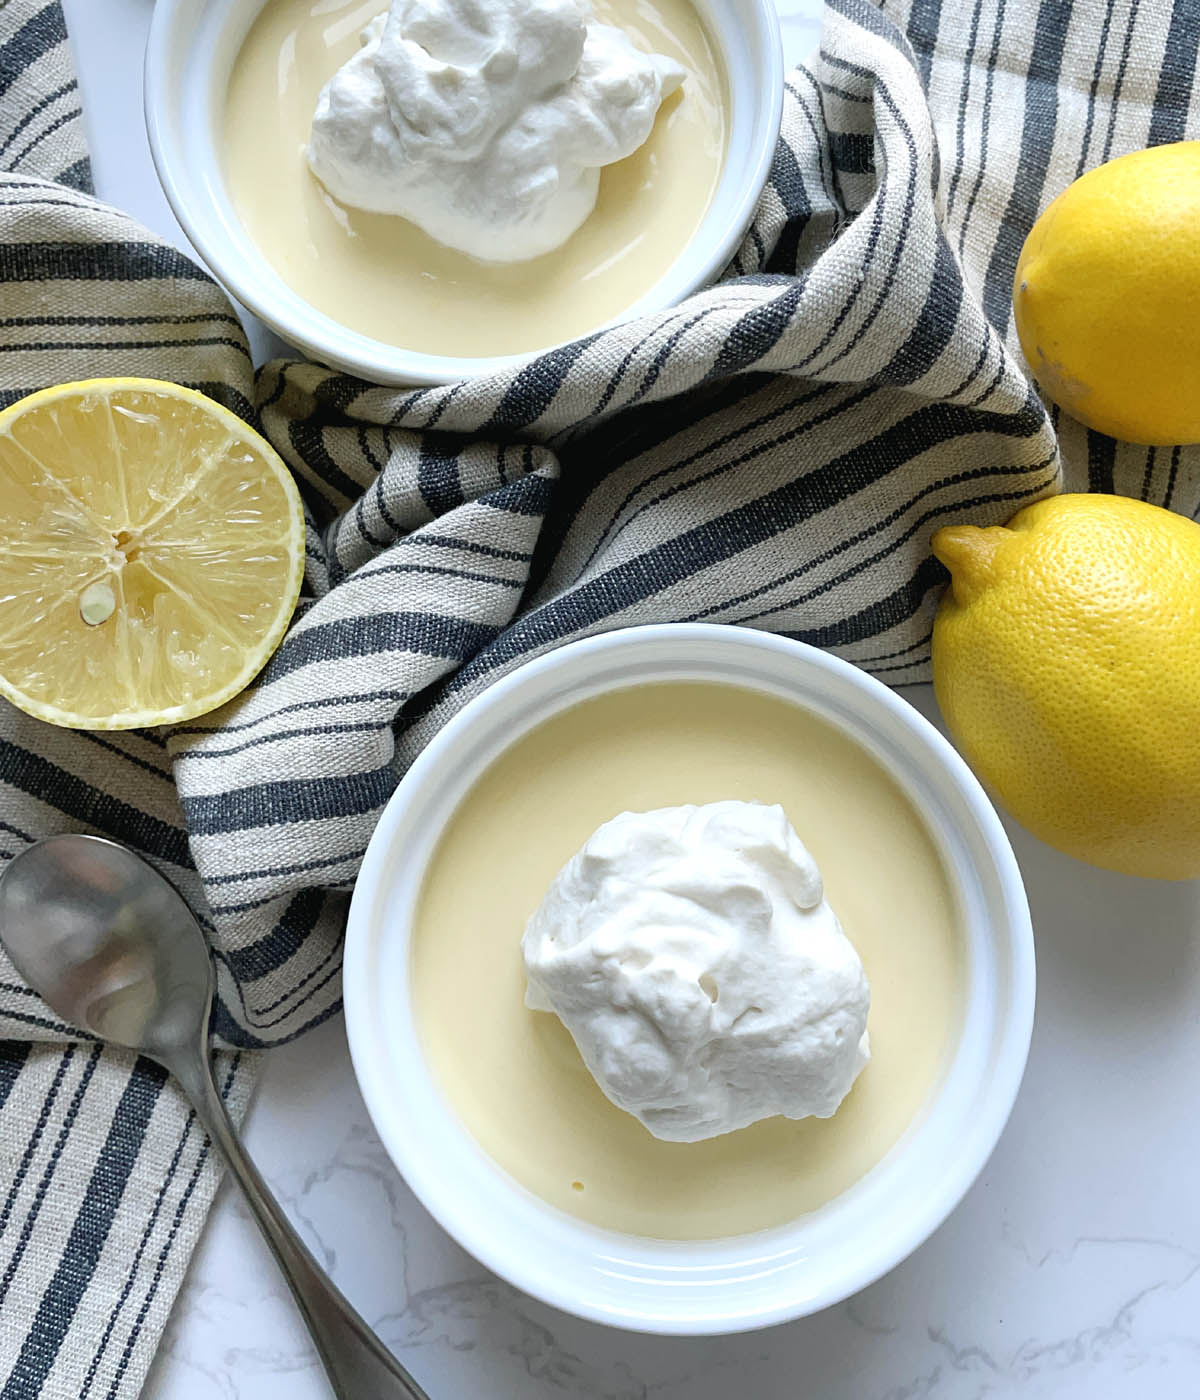 A striped towel and lemons next to two white round dishes containing lemon pudding and whipped cream.